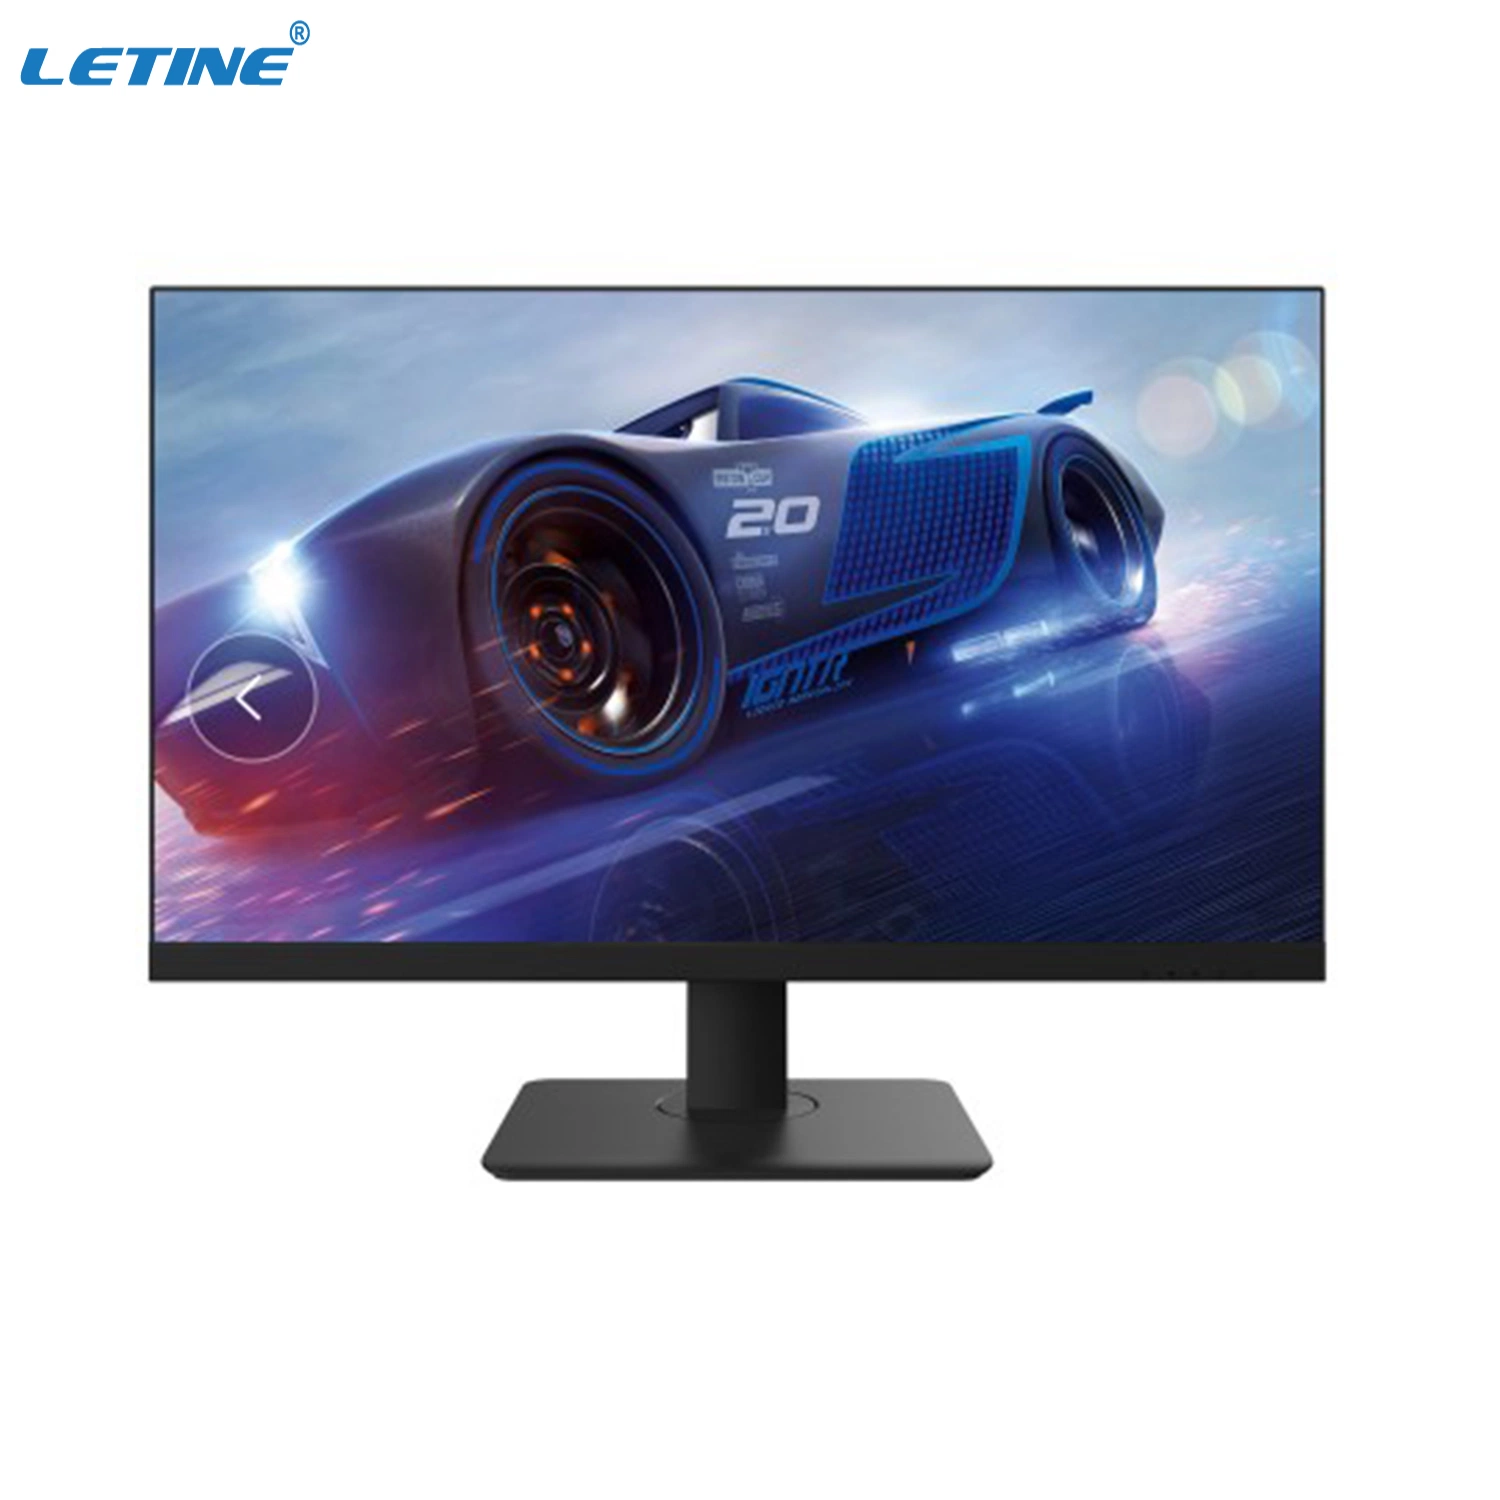 LCD Display IPS Screen LED PC Monitor 19 21.5 24 27 32 34 Inch Office Home School Hospital Computer Monitor